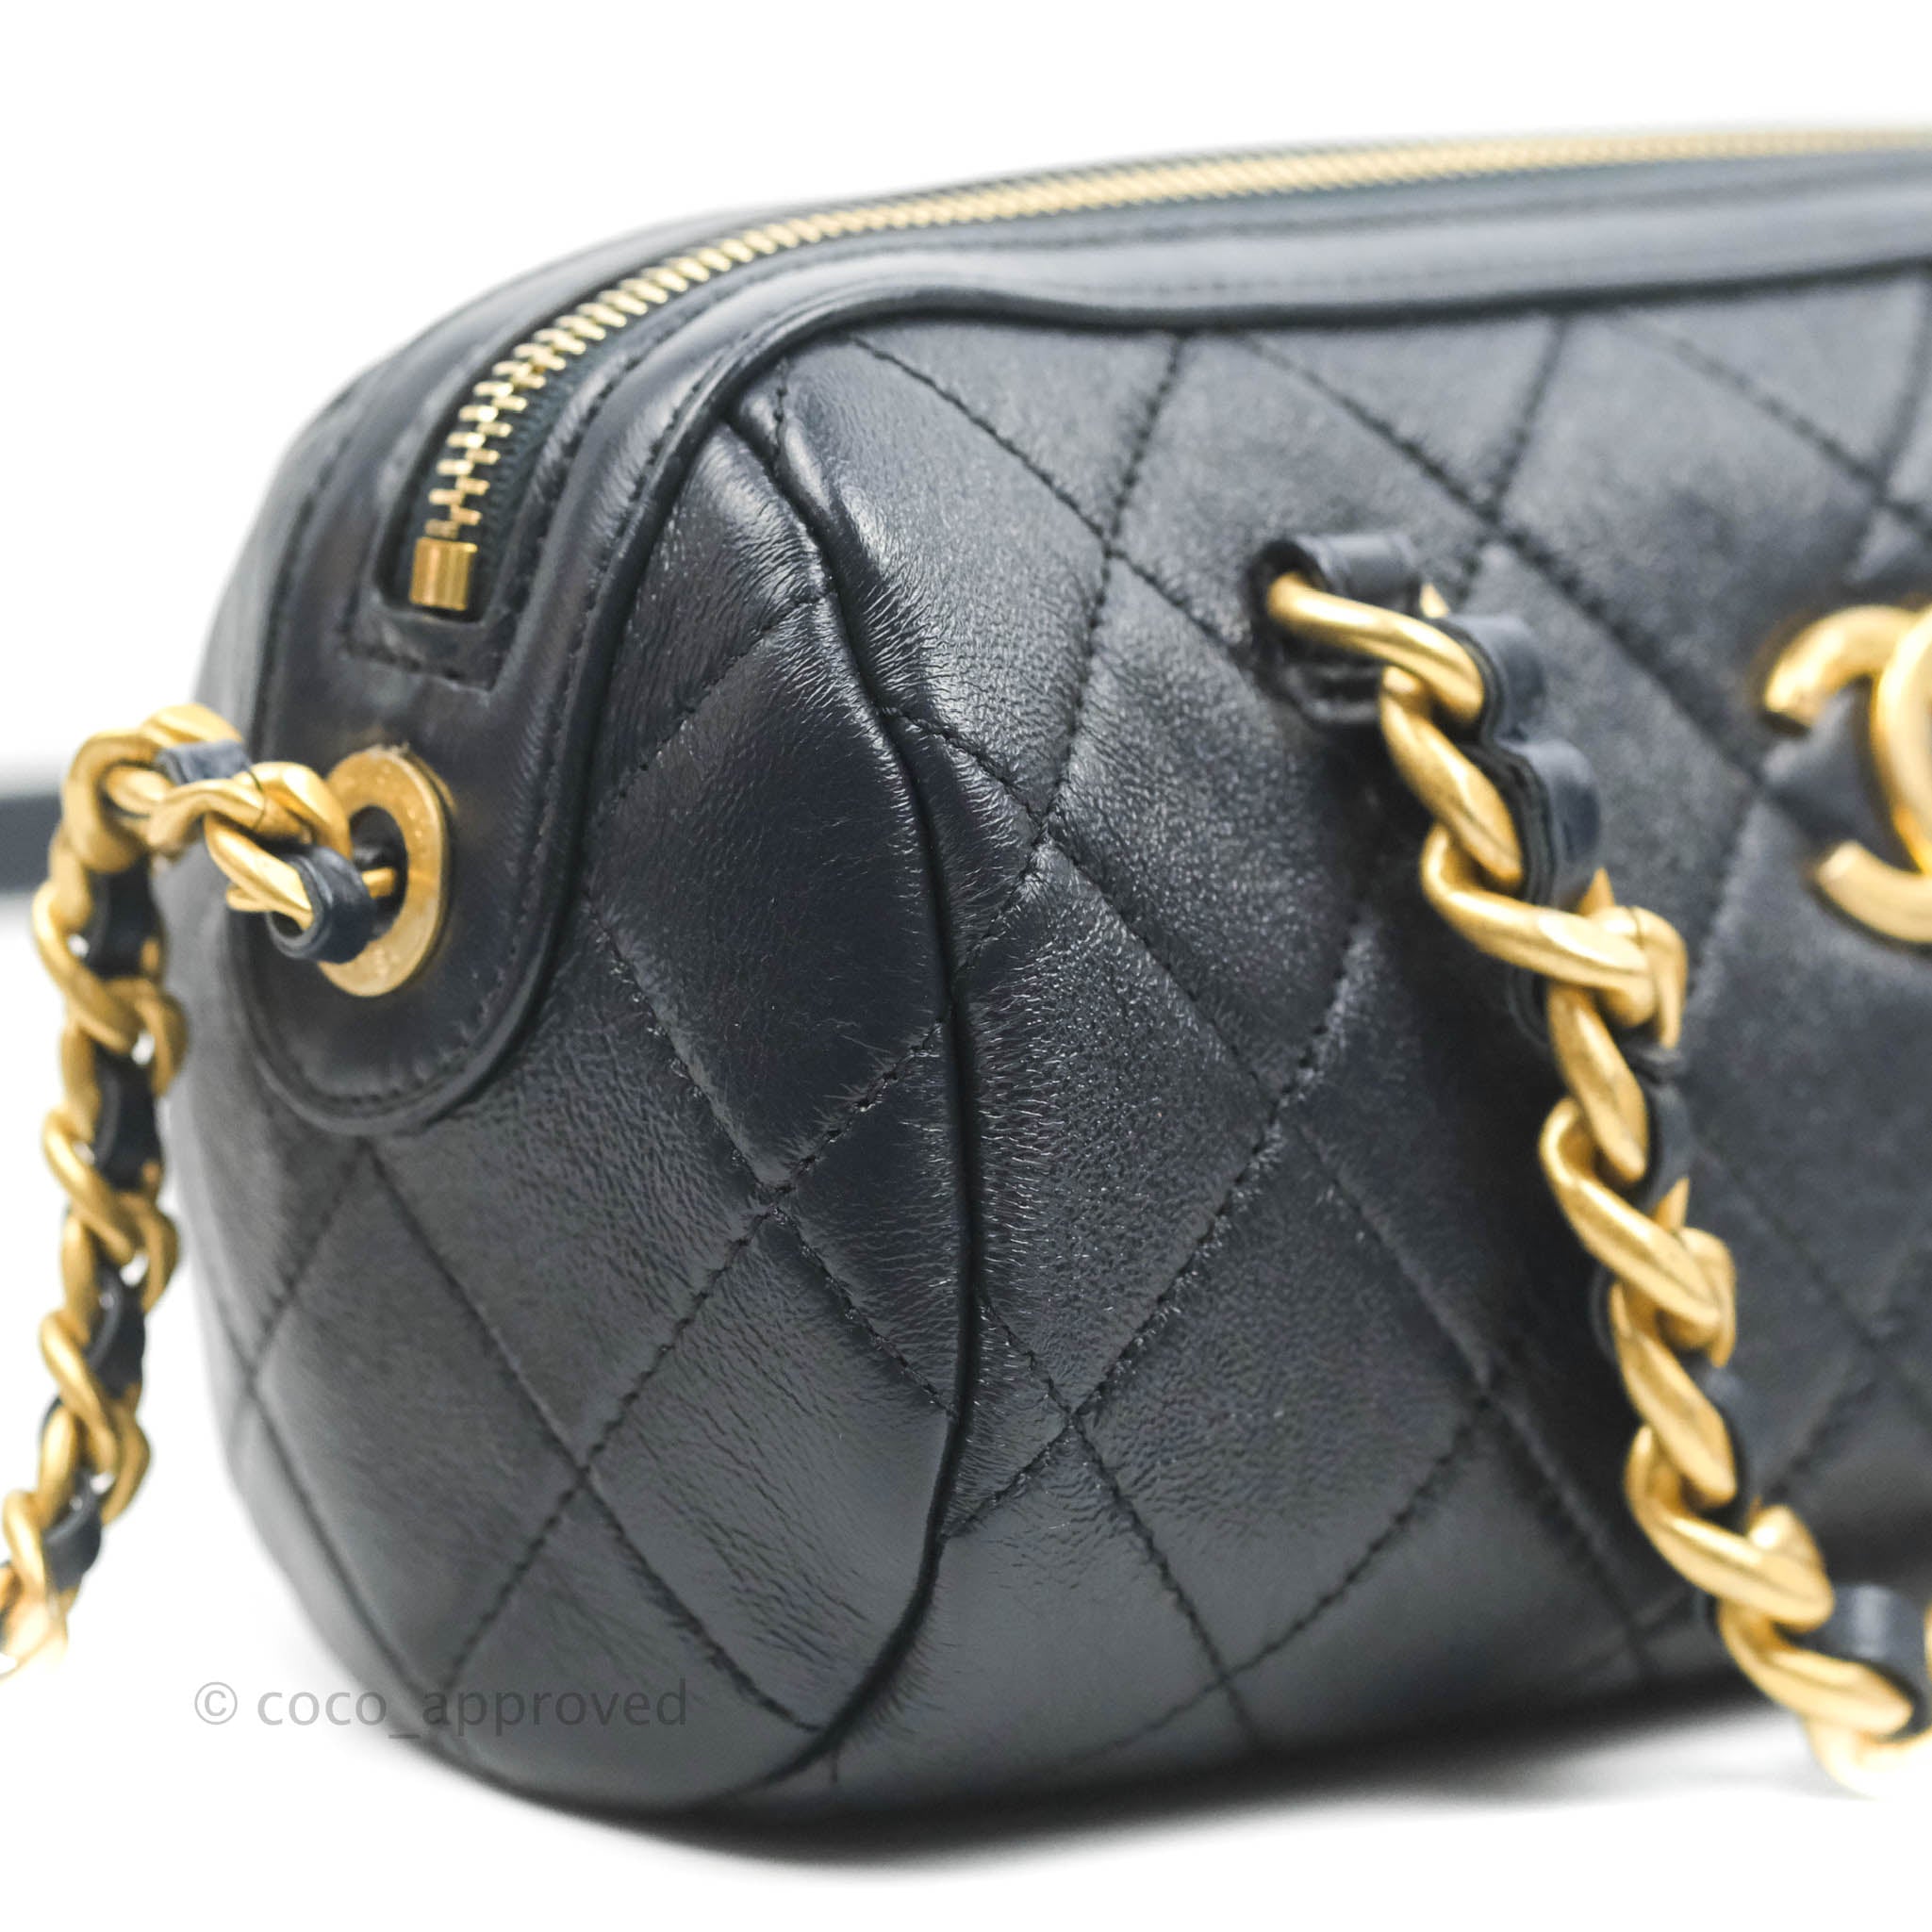 Chanel Quilted Fashion Therapy Bowling Bag Dark Navy Lambskin Gold Har –  Coco Approved Studio